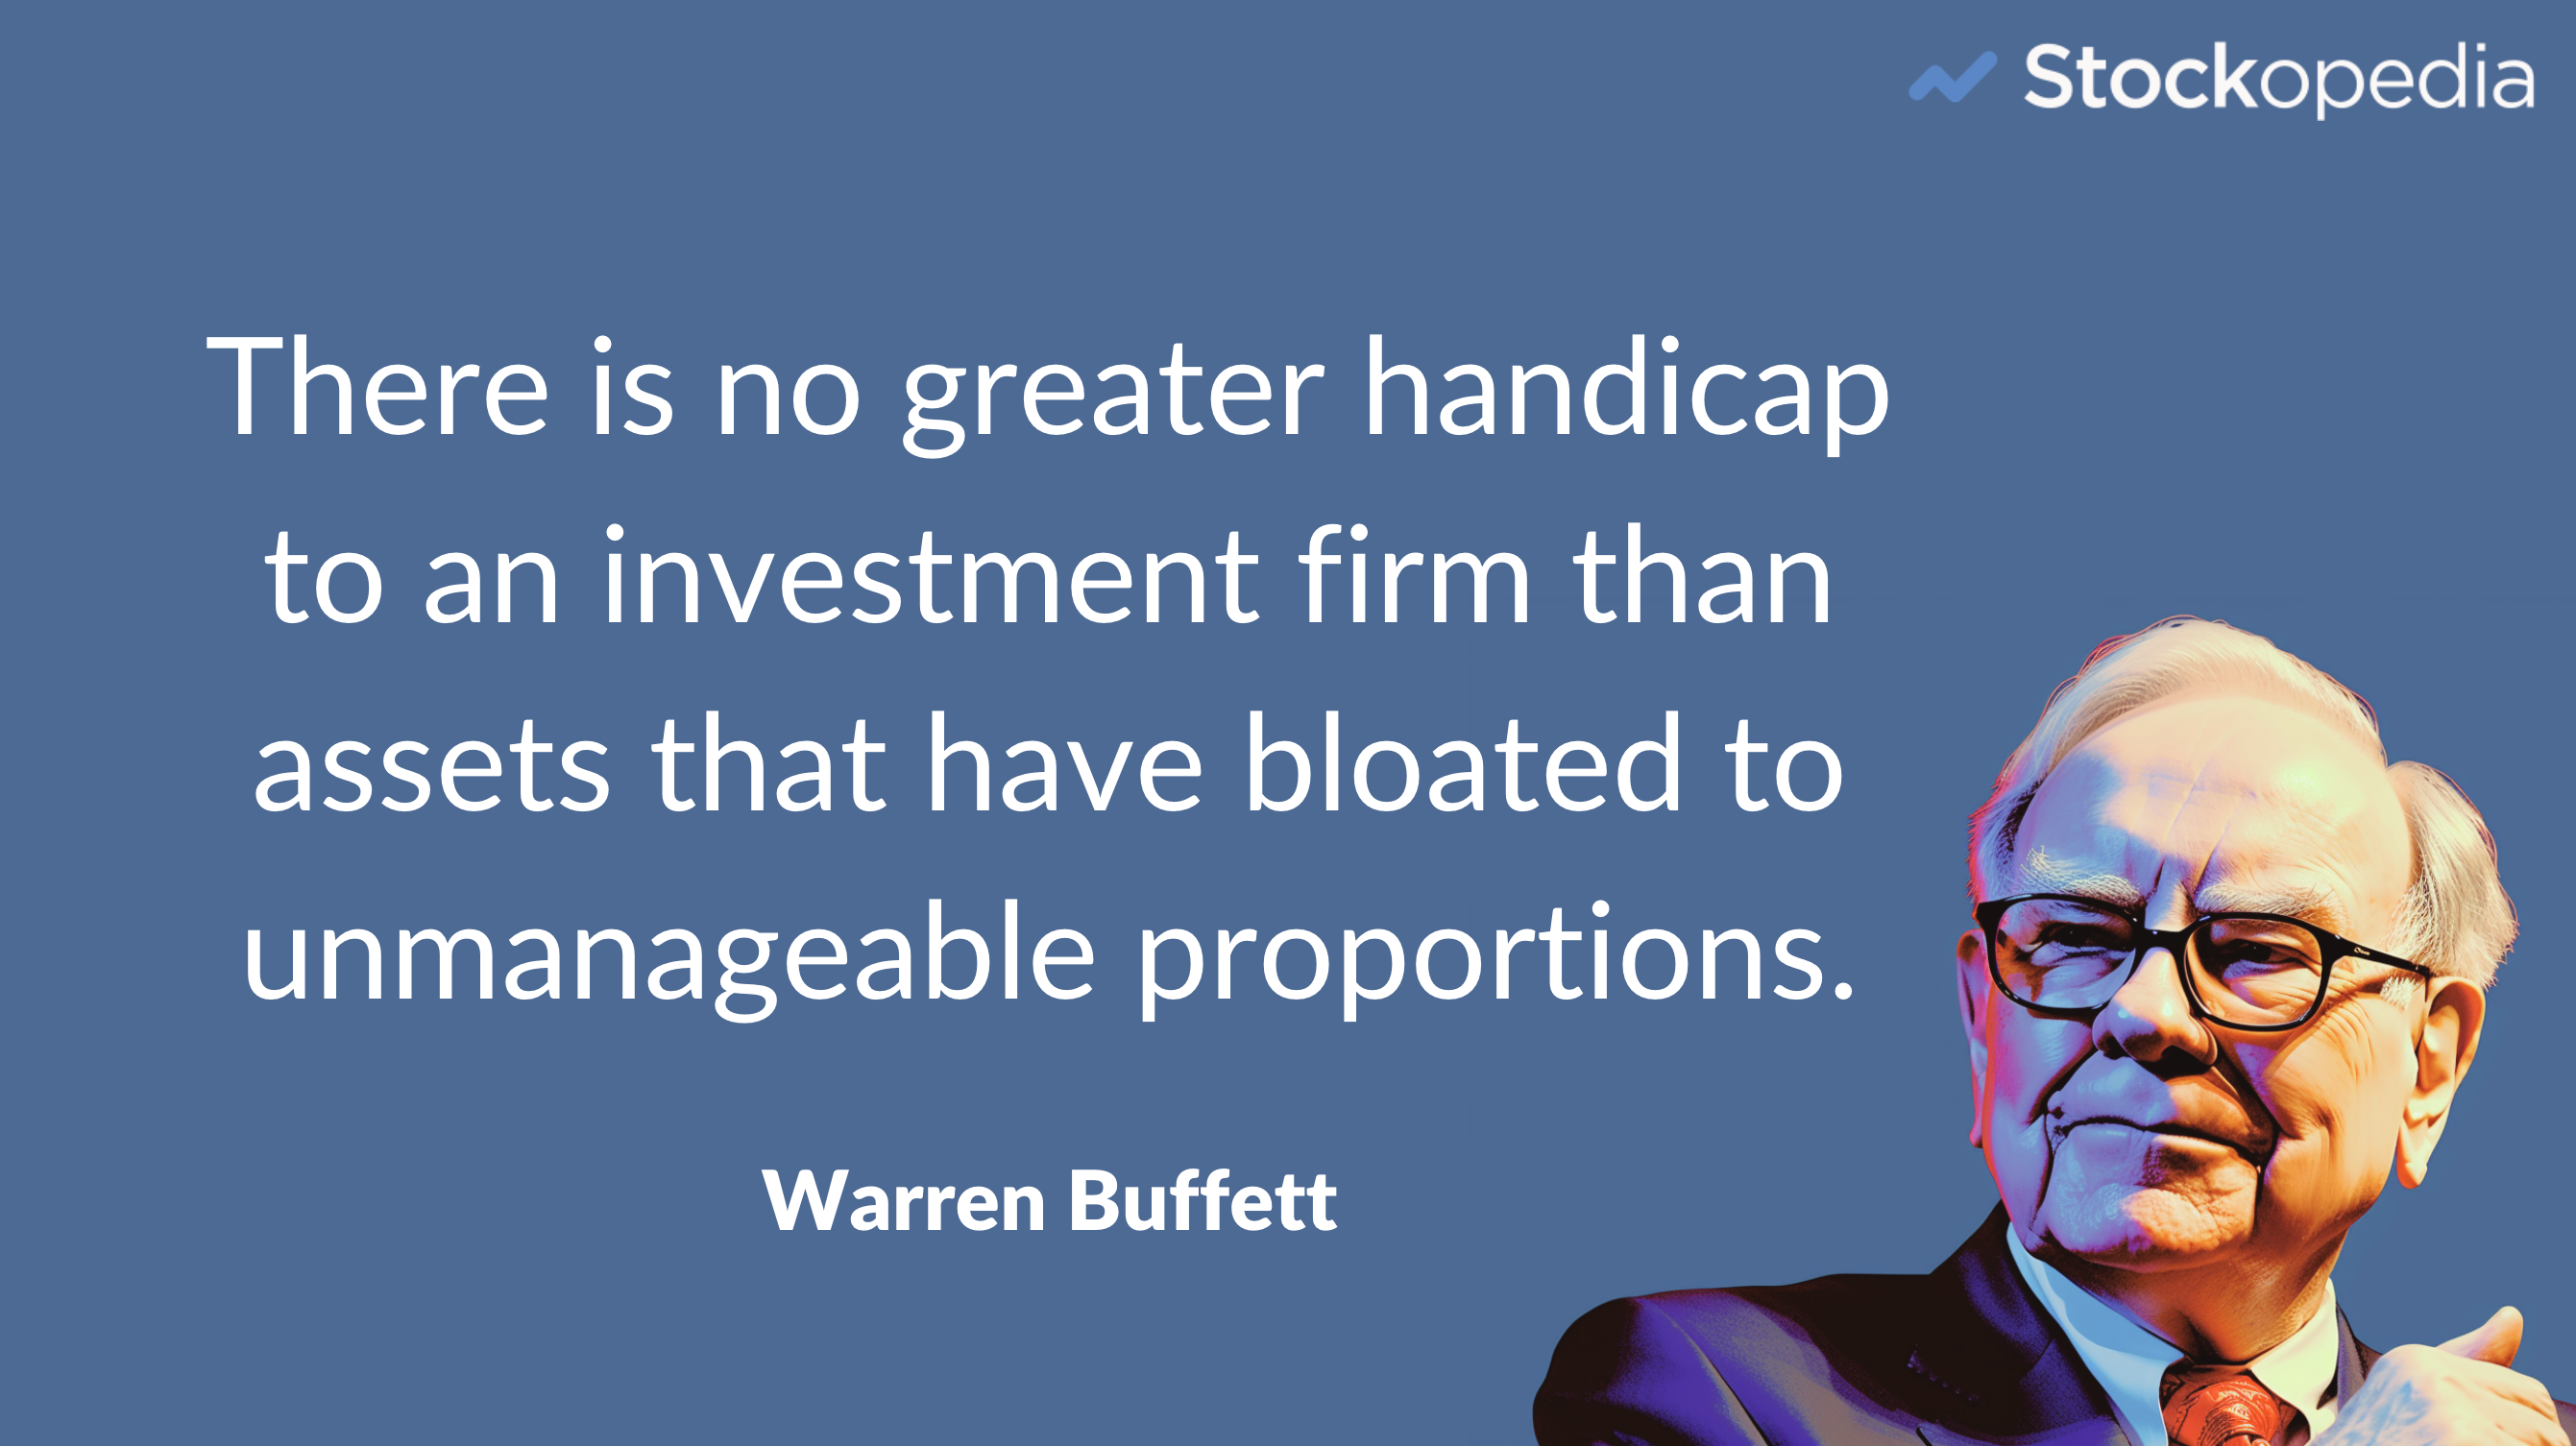 There is no greater handicap to an investment firm than assets under management that have bloated to unmanageable proportions. Warren Buffett